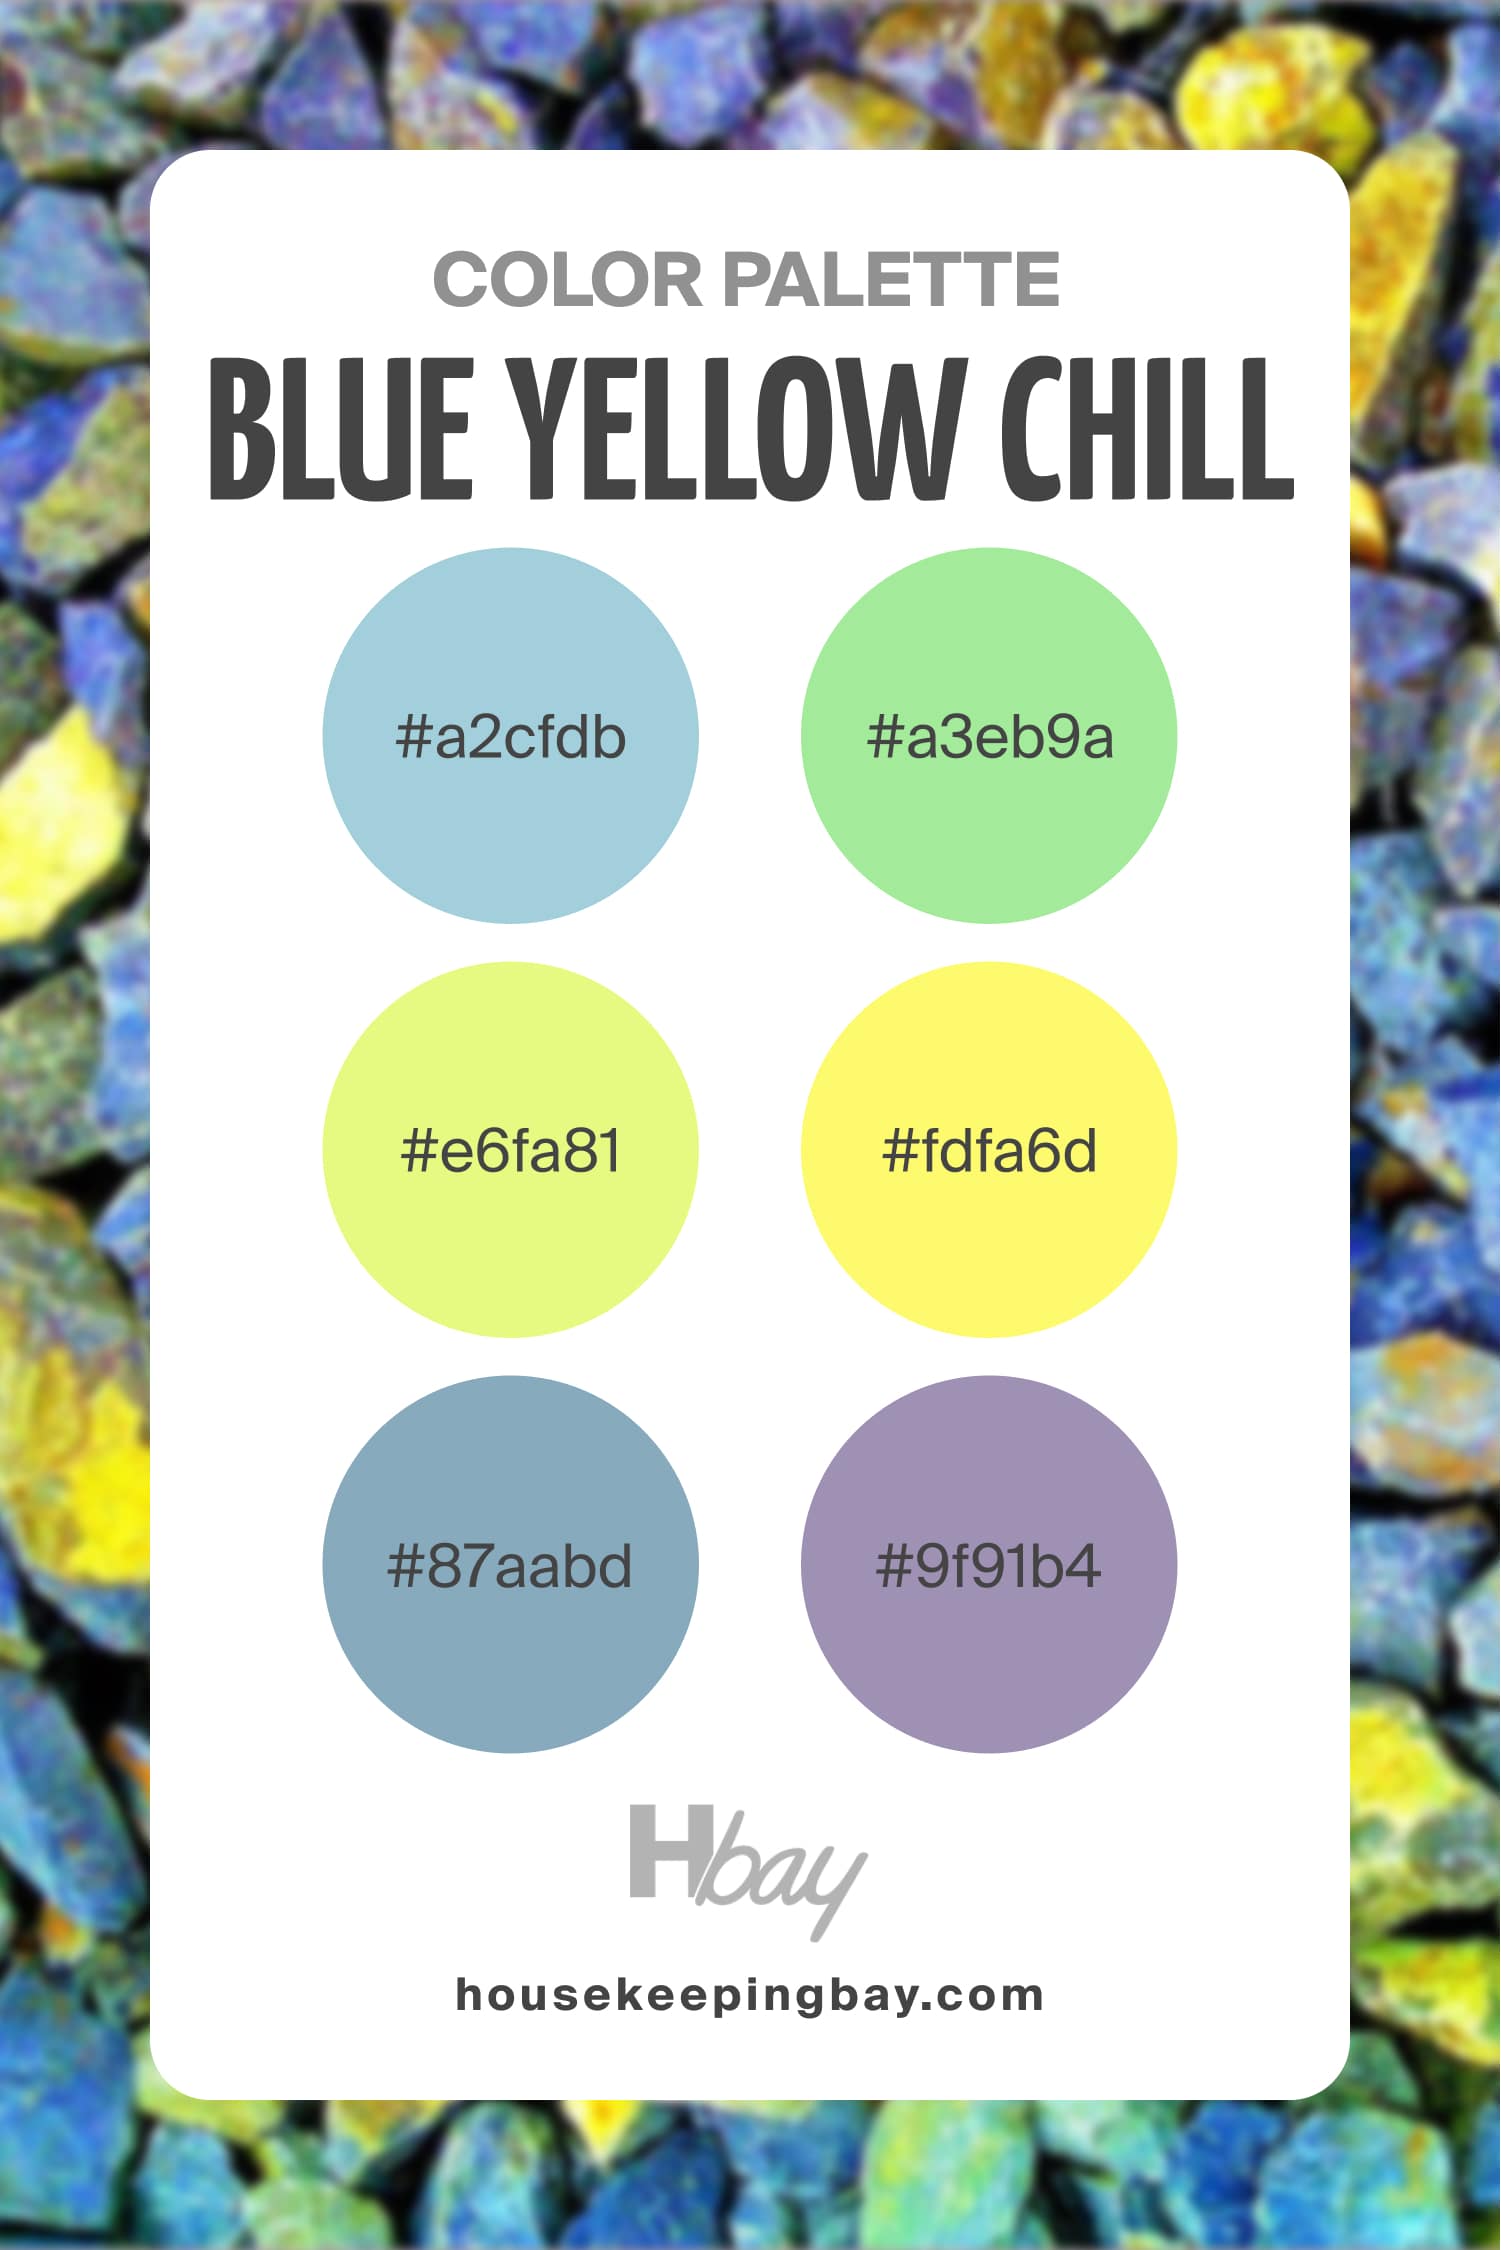 Blue Yellow Chill Palette